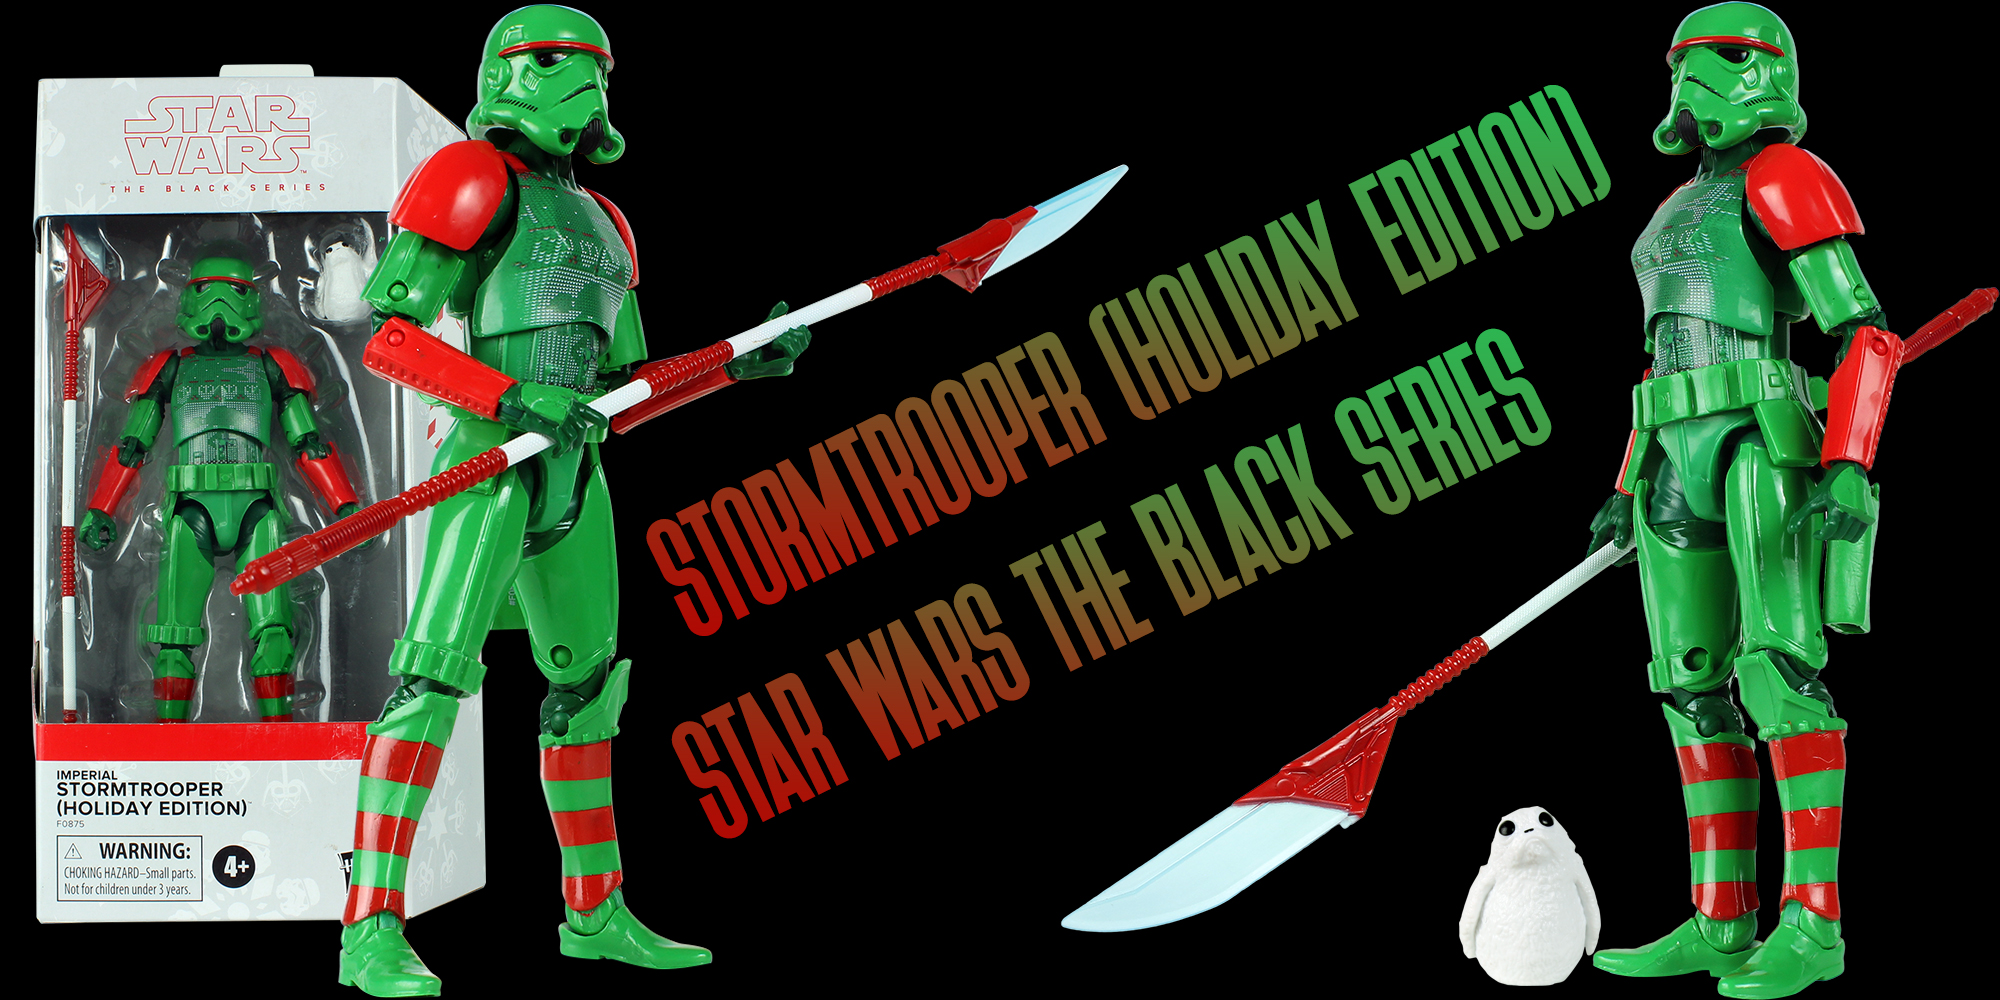 Black Series Stormtrooper Holiday Edition